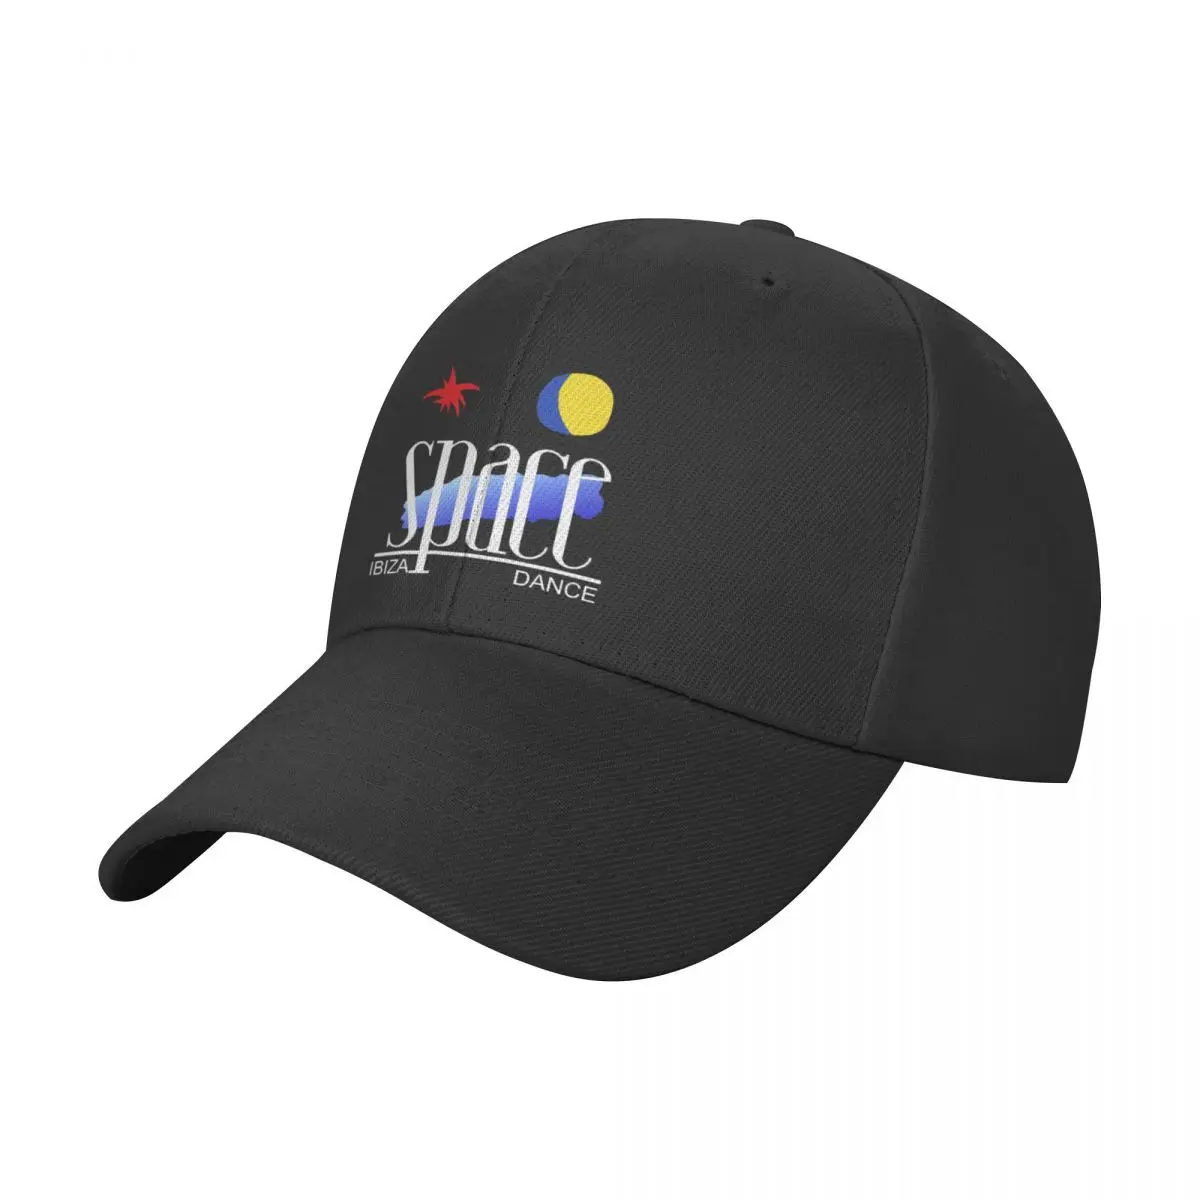 

SPACE Ibiza Dance: MODEL 2 classic black Mythical nightclub of La French Touch Baseball Cap Ball Cap Hat For Girls Men's